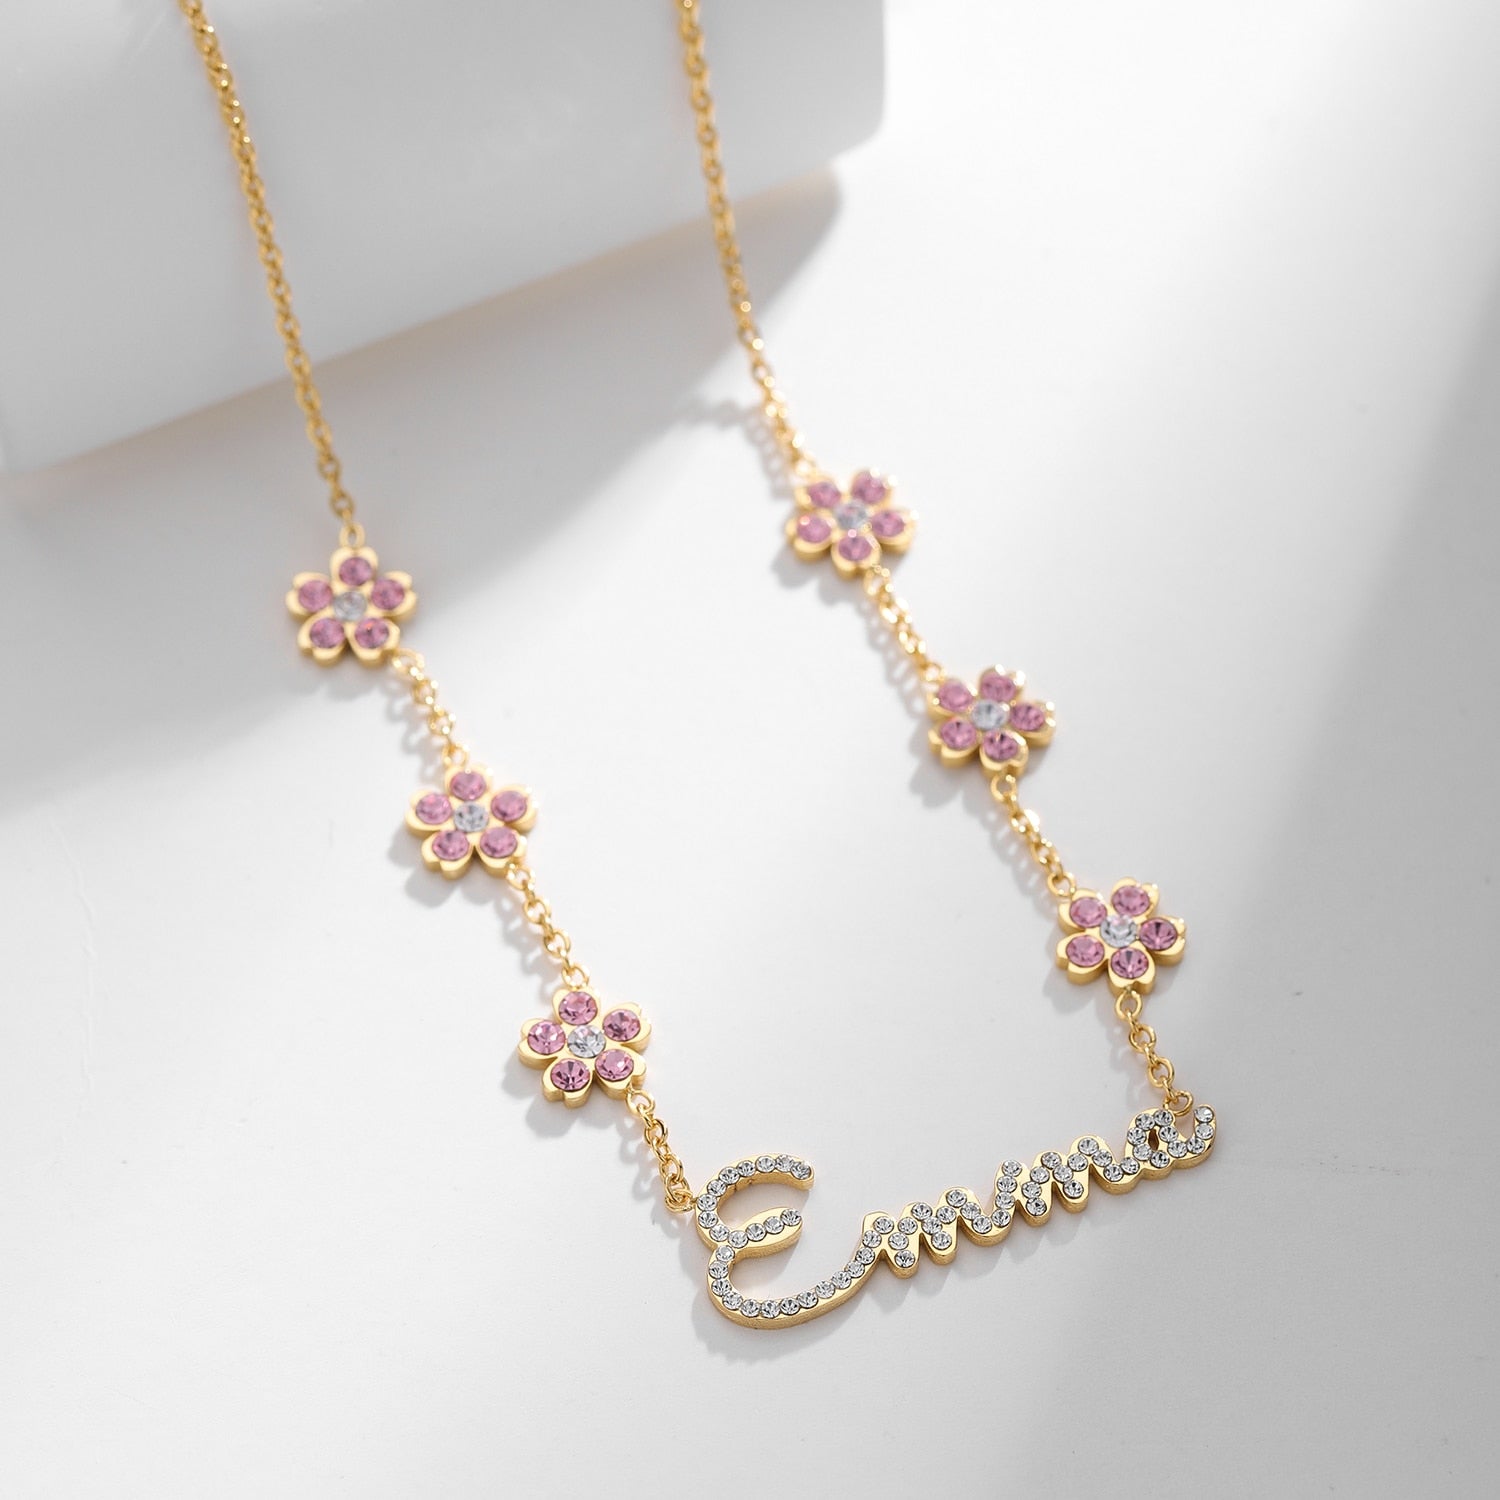 Personalized Crystal Flower Pendant Necklace